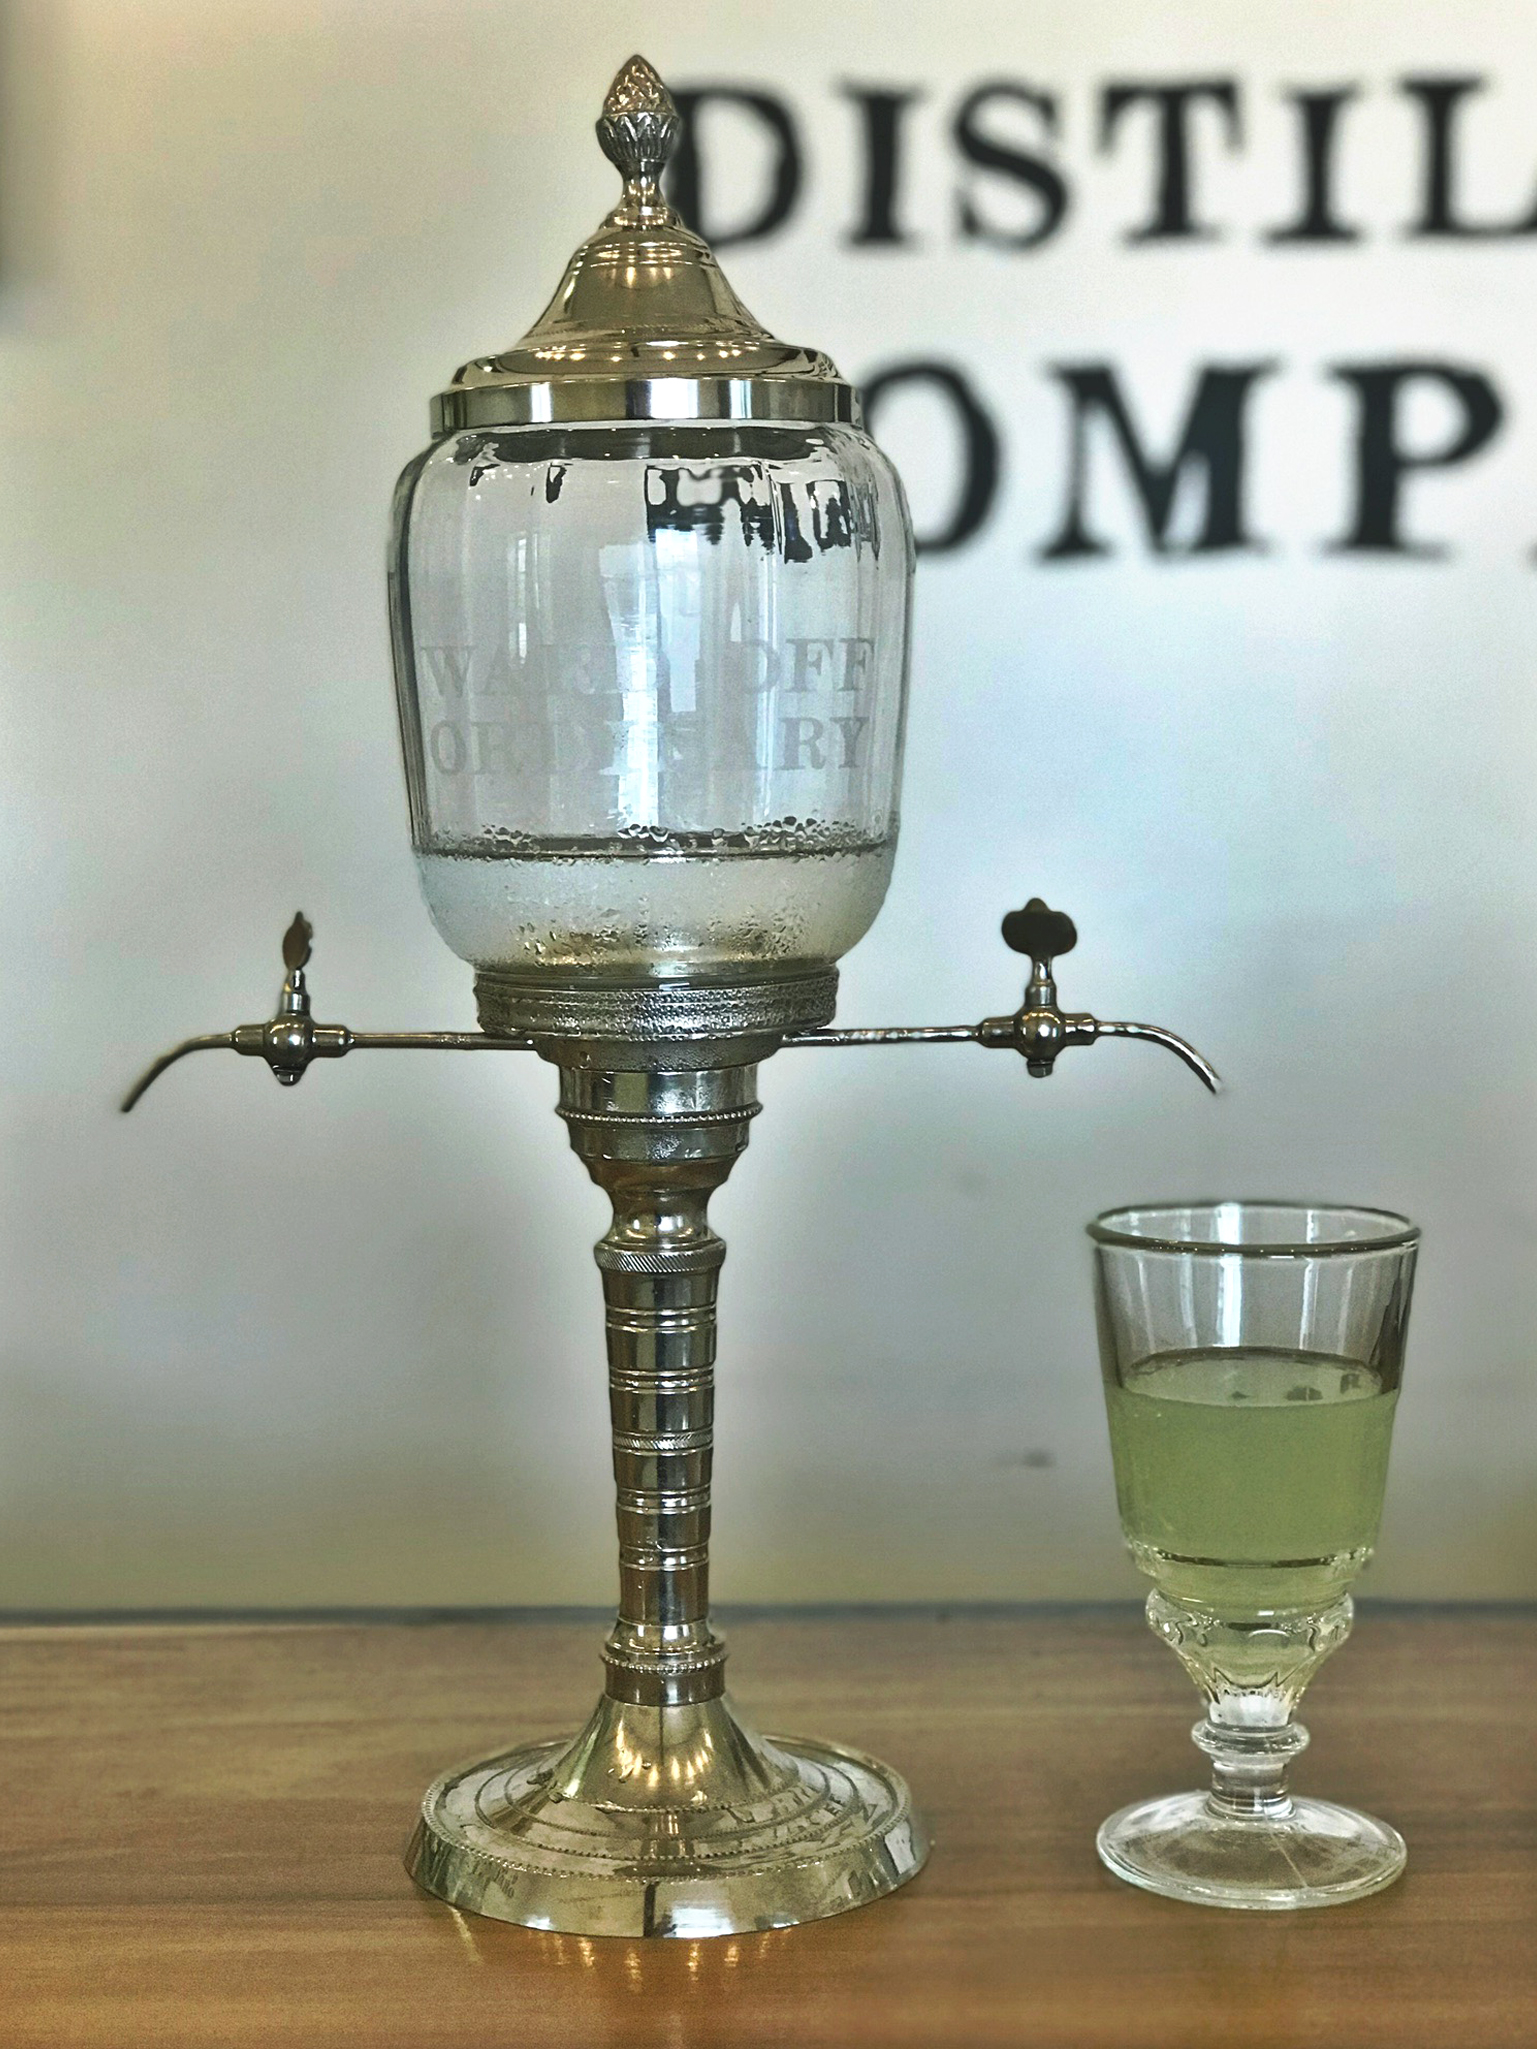 Maryland's first Absinthe, Tenth Ward Distilling Company, Frederick, Maryland